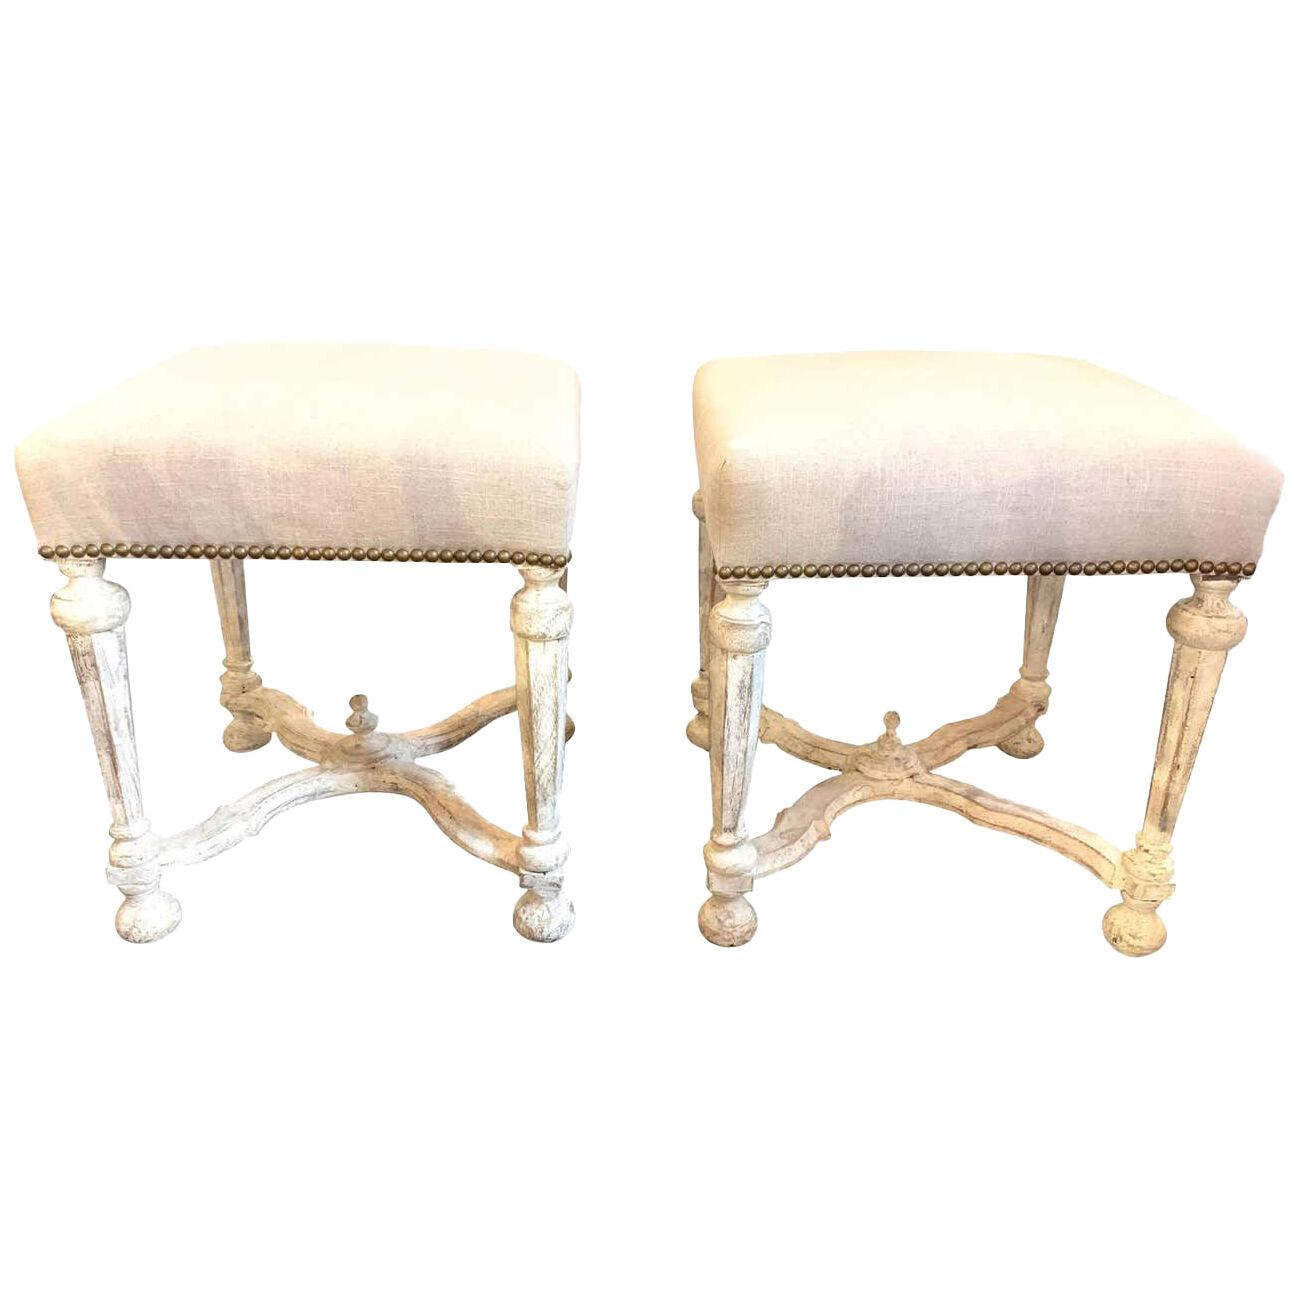 Pair of Continental Carved and Painted Upholstered Stools